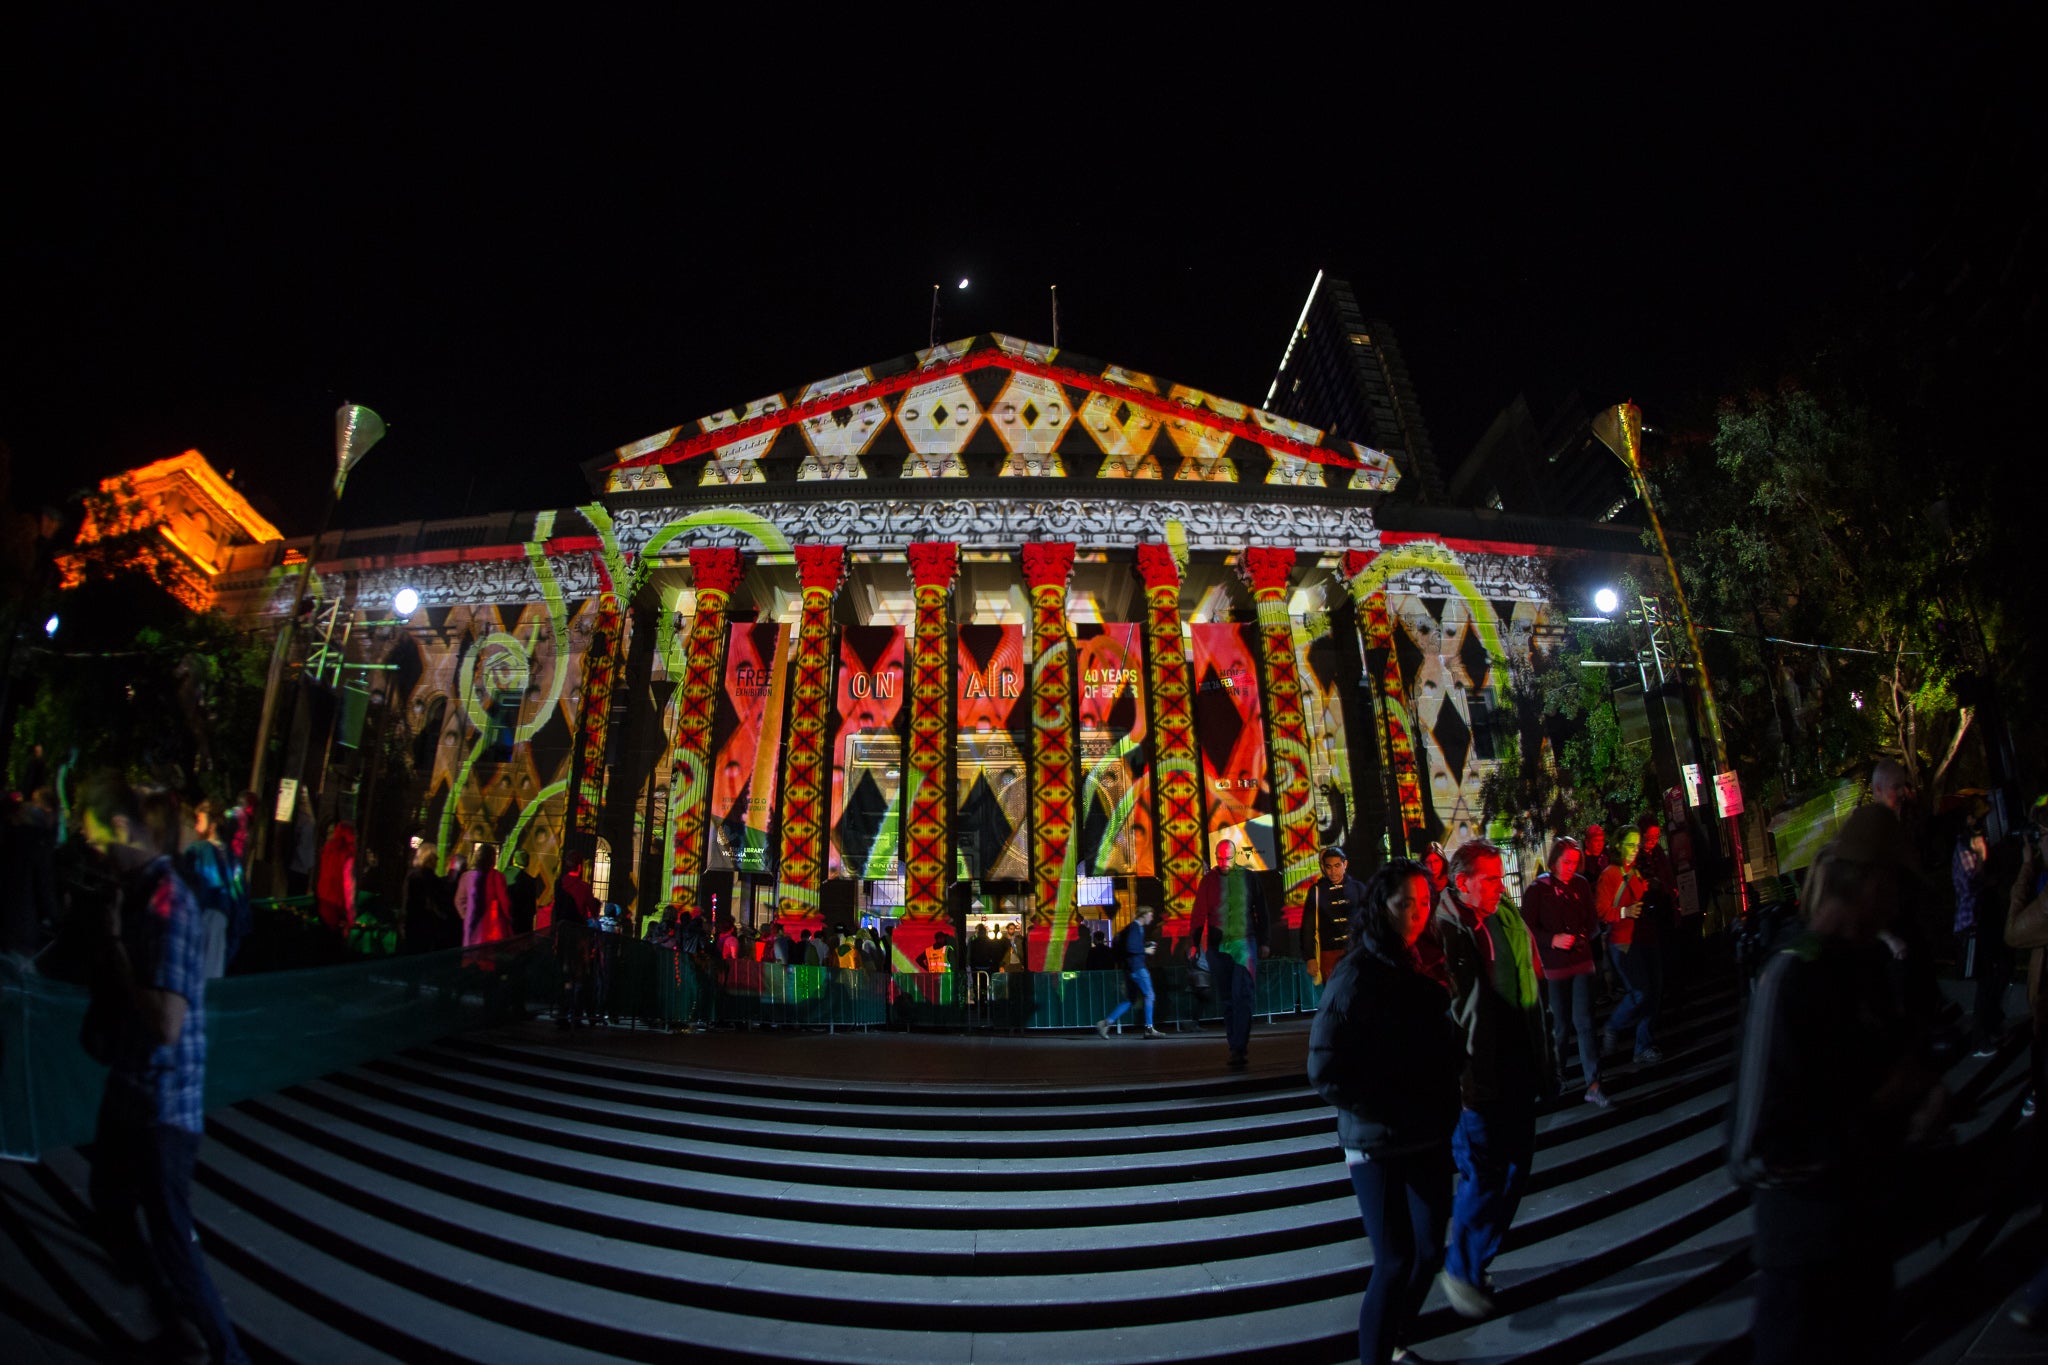 White Night Melbourne is coming soon — Brush up on your night shooting with these helpful tips!